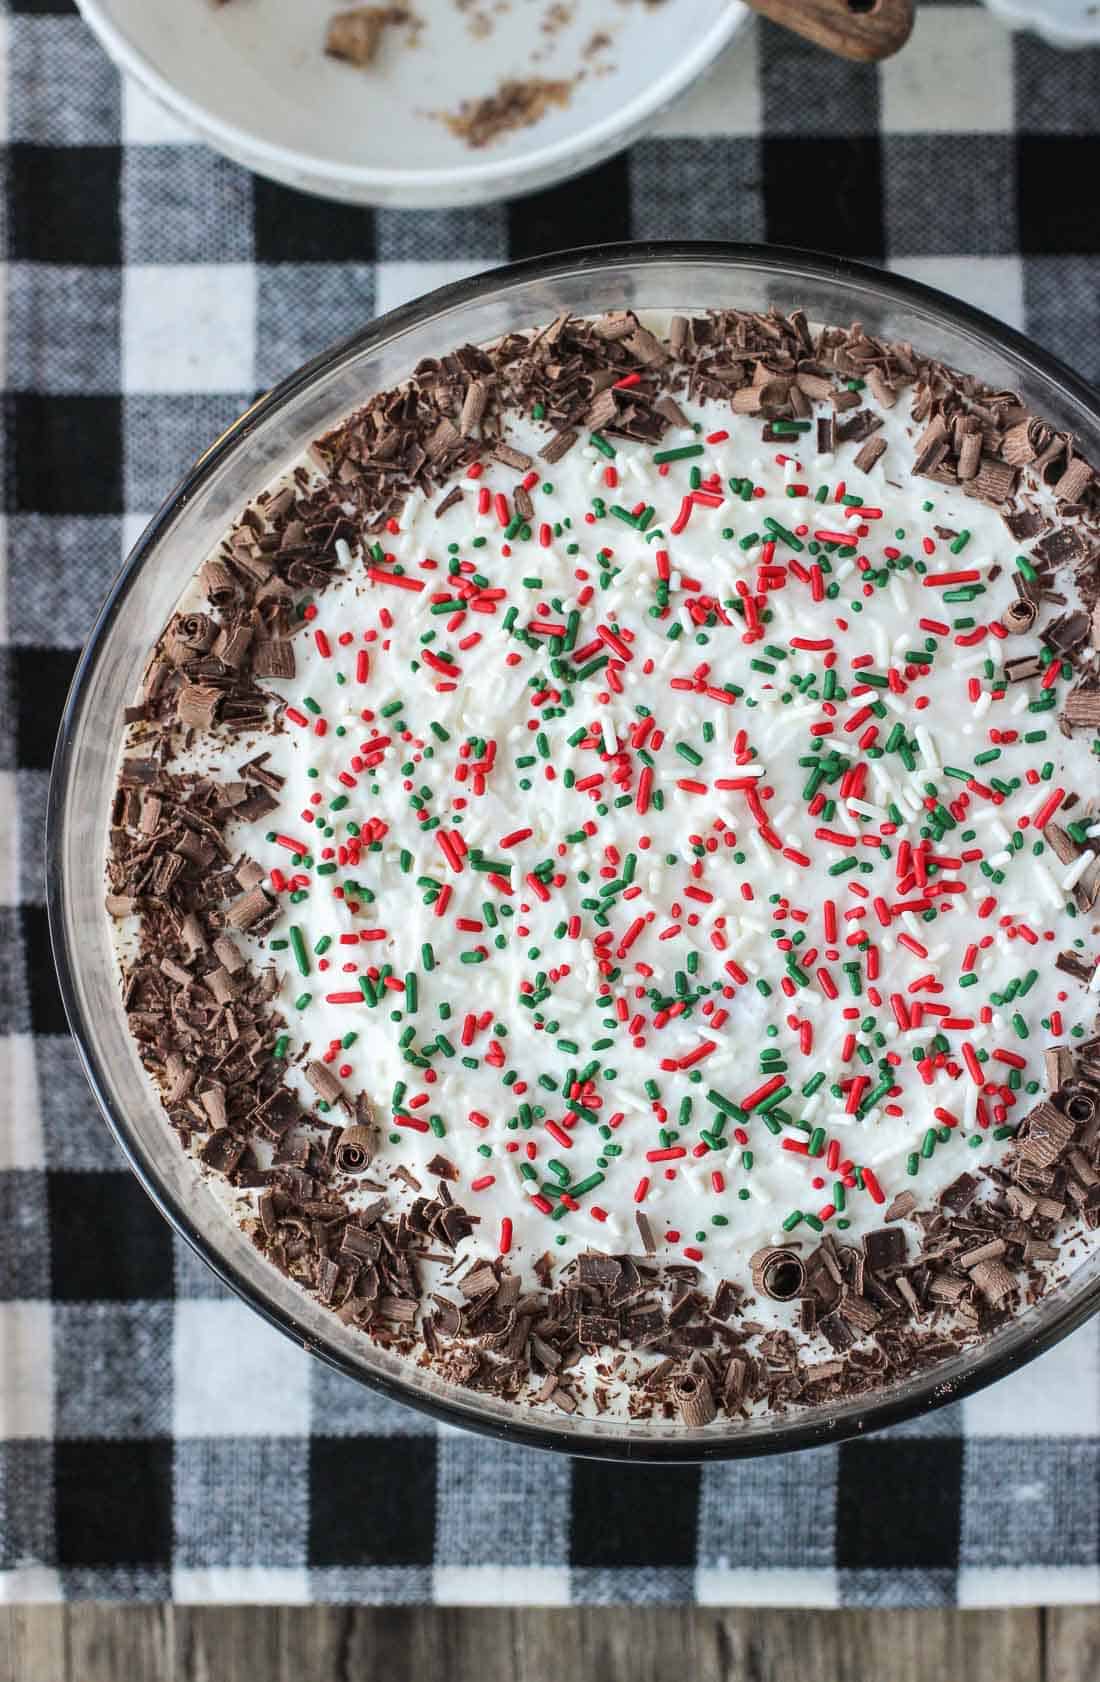 Trifle in a large glass bowl topped with Christmas sprinkles and chocolate curls.